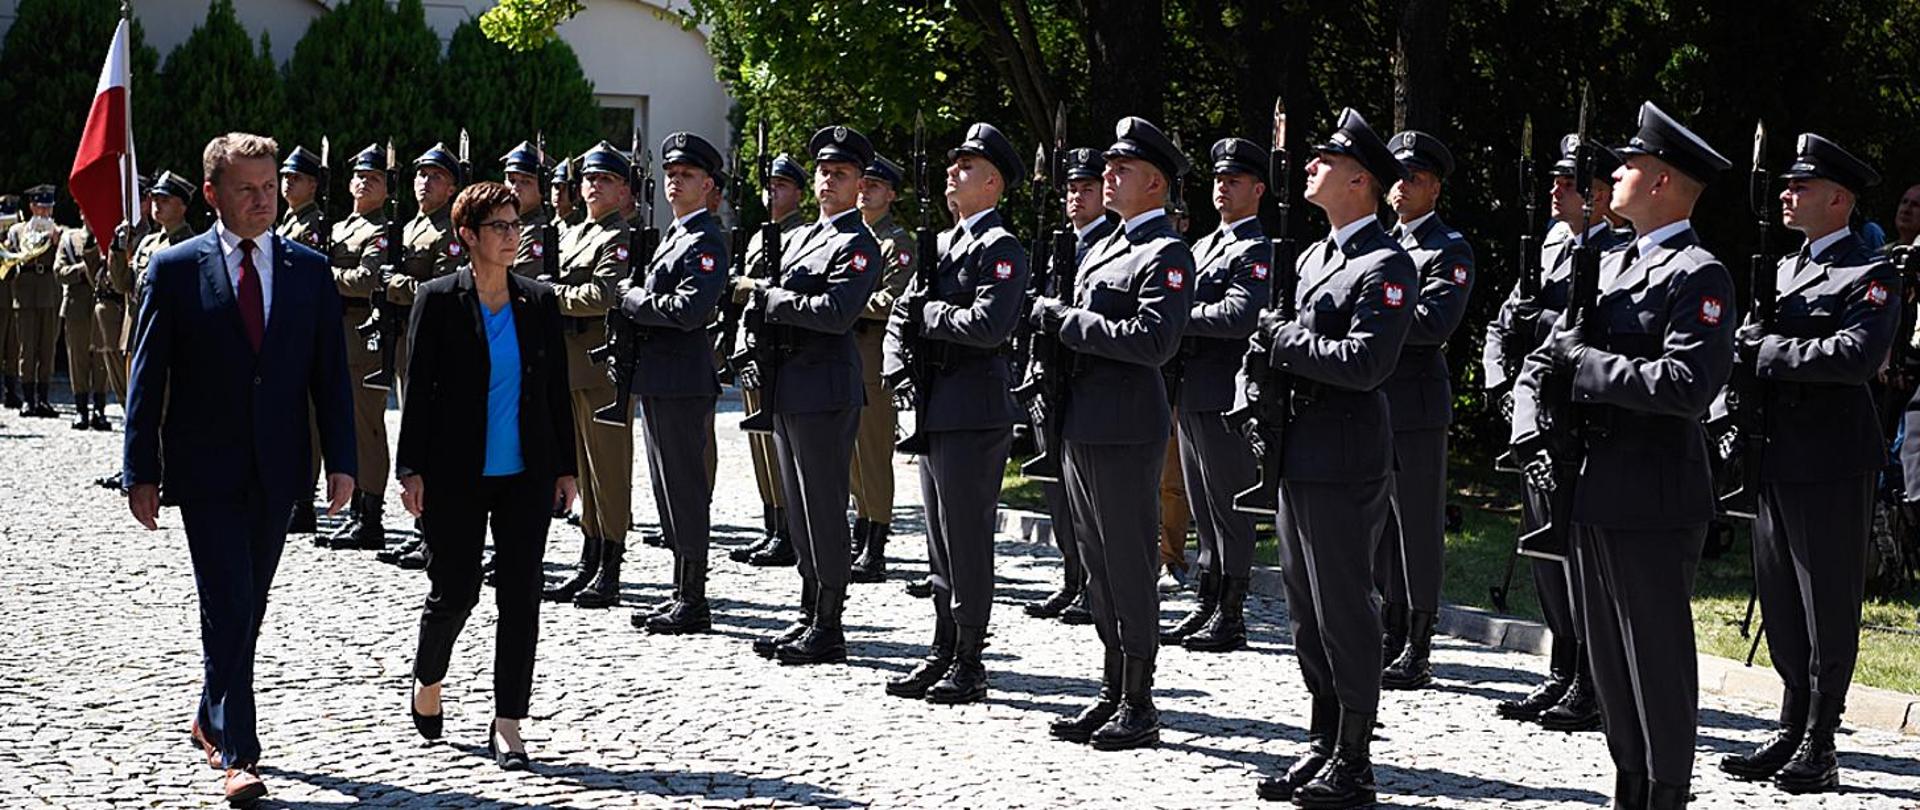 Meeting of the ministers of Poland and Germany who inspect Polish Honour Guard in front of Polish MOD building